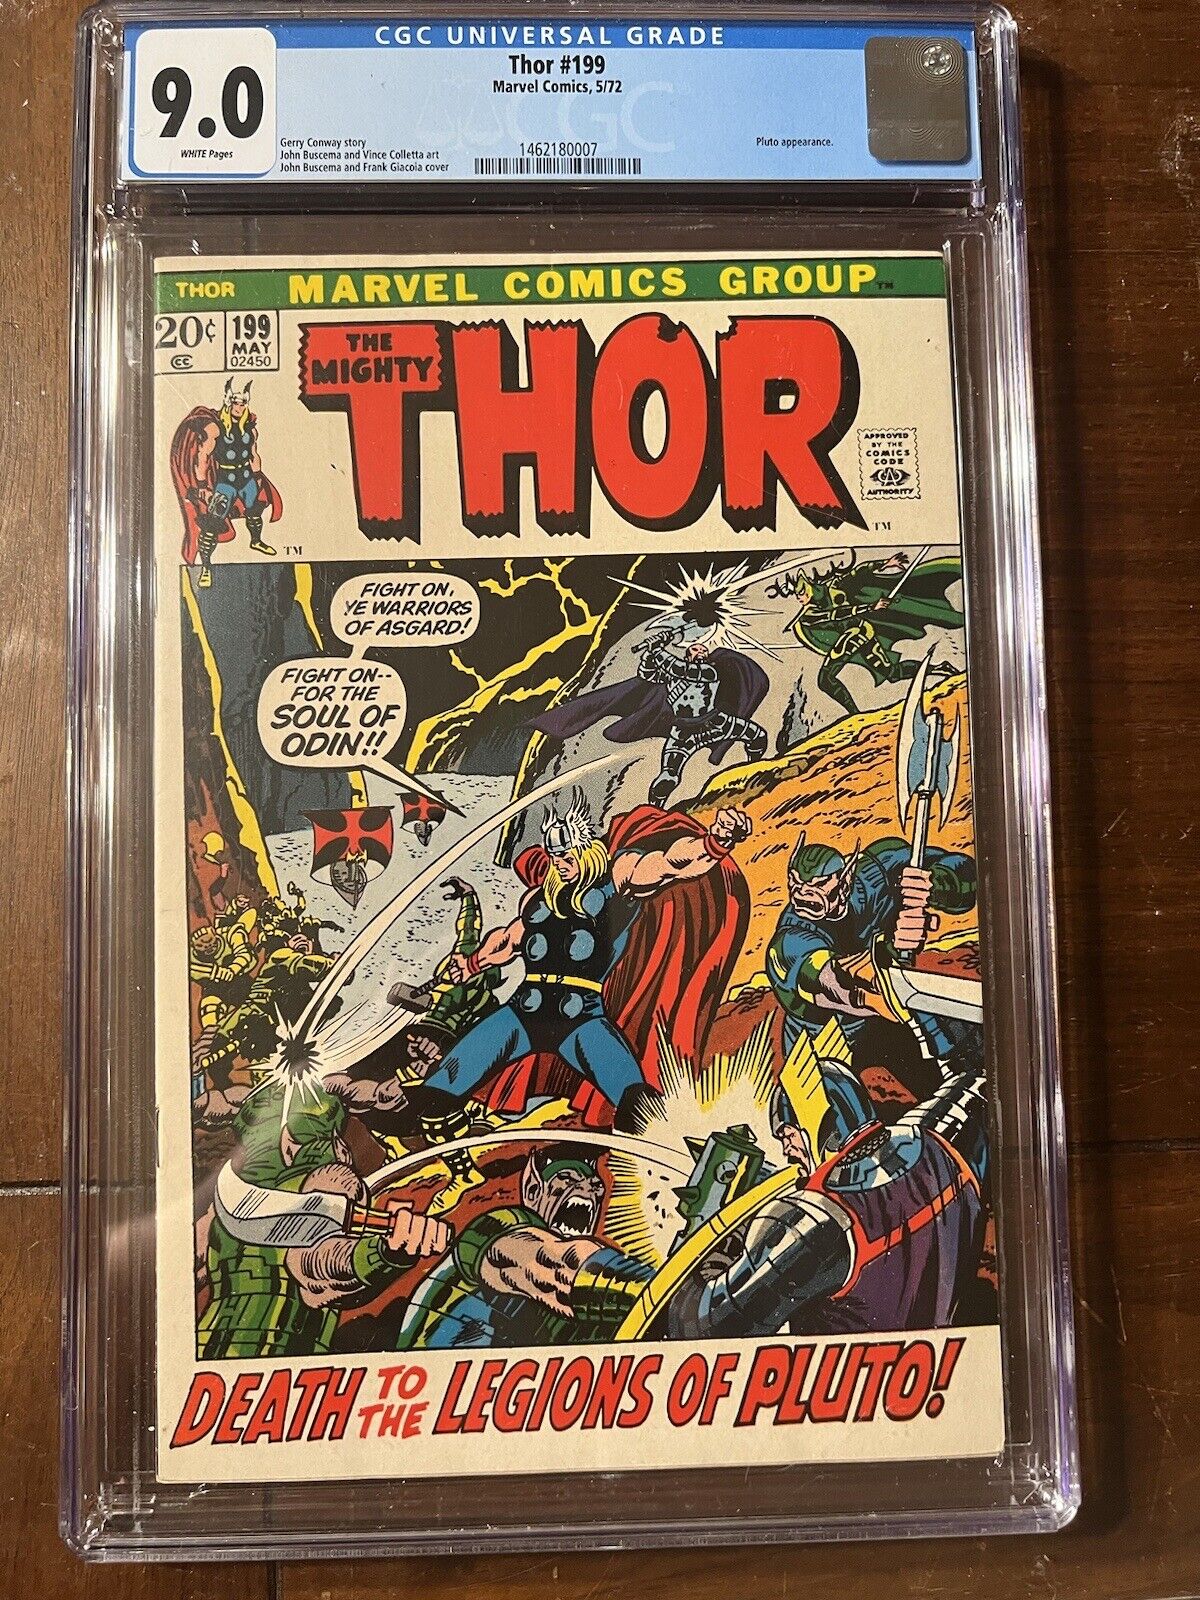 THOR #199 5/72 CGC 9.0 WHITE PAGES DYNAMIC CLASSIC COVER NICE